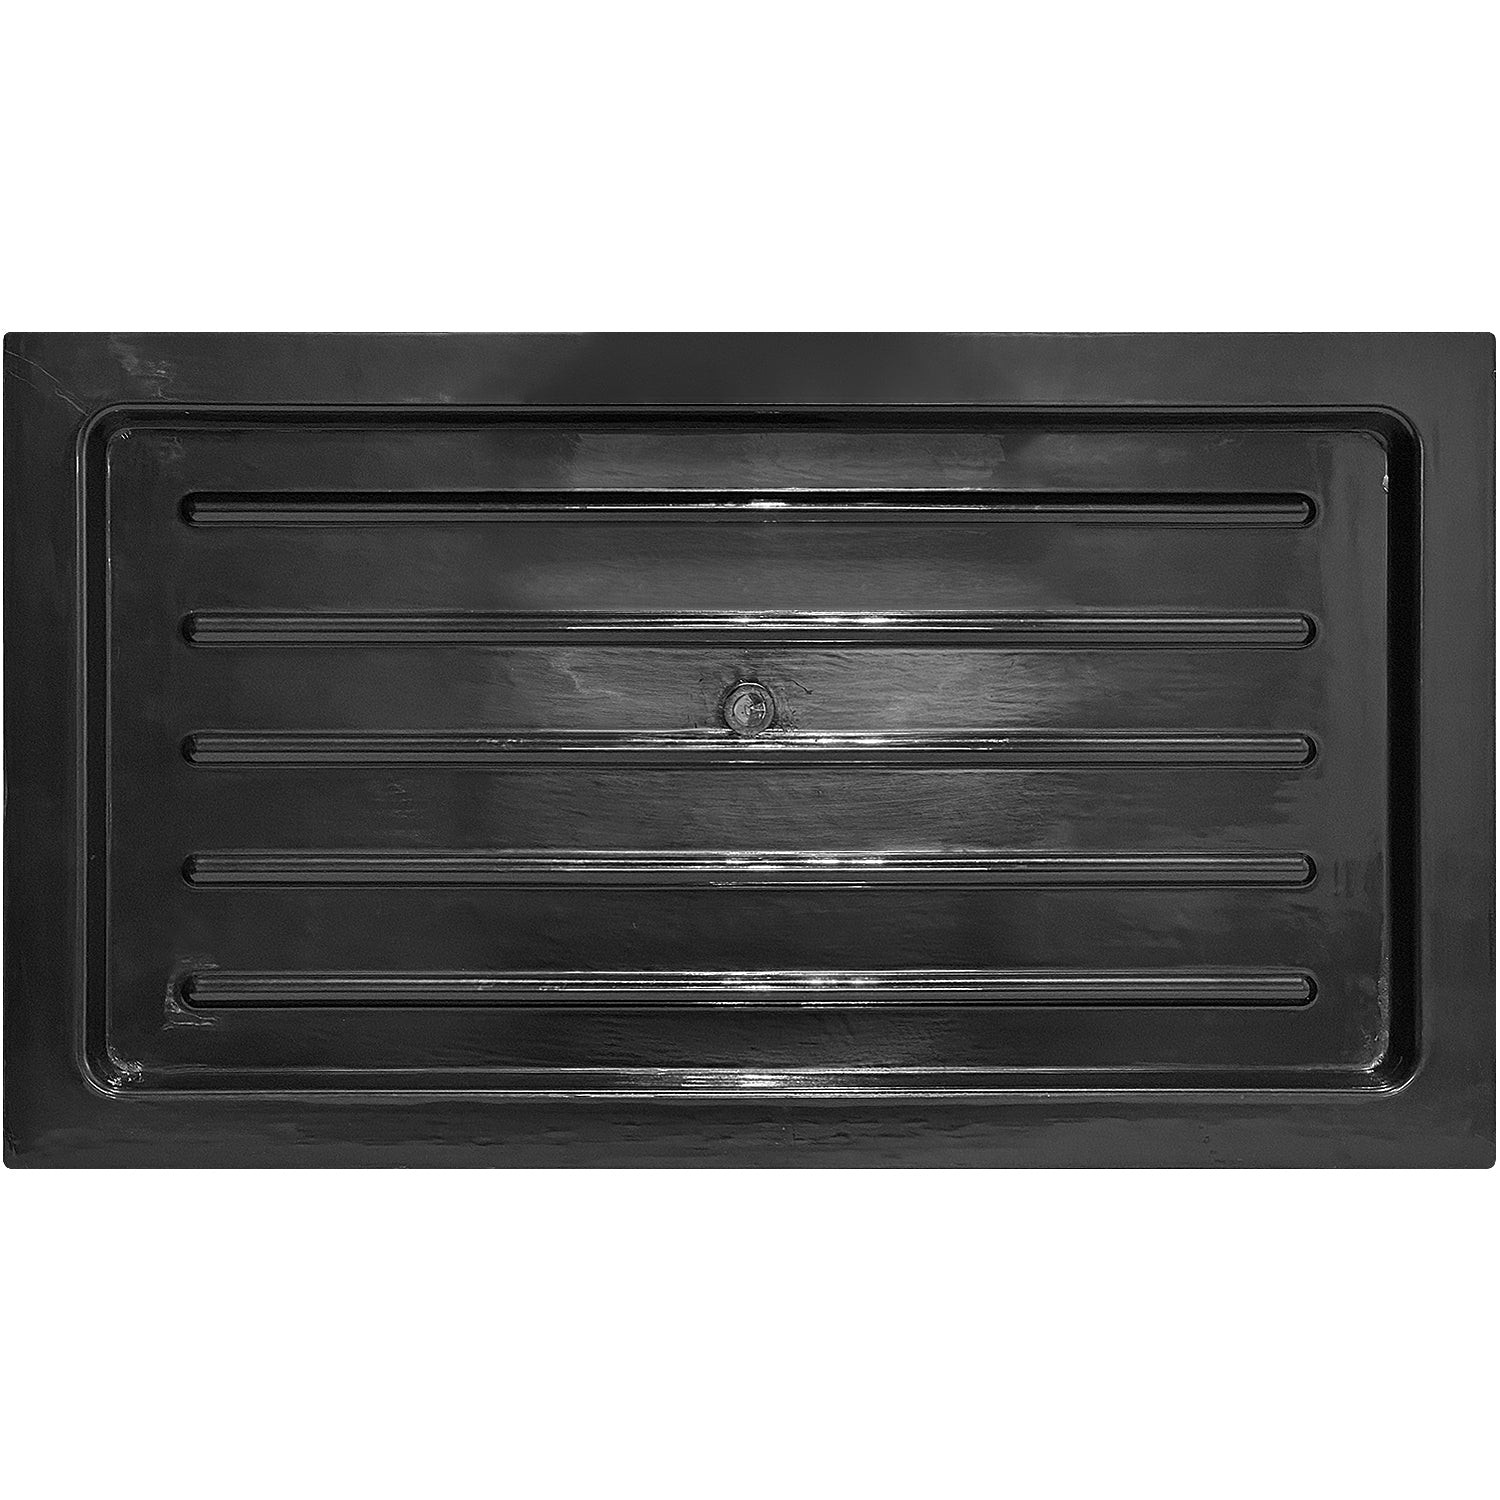 Back of small outward mounted vent cover (black)